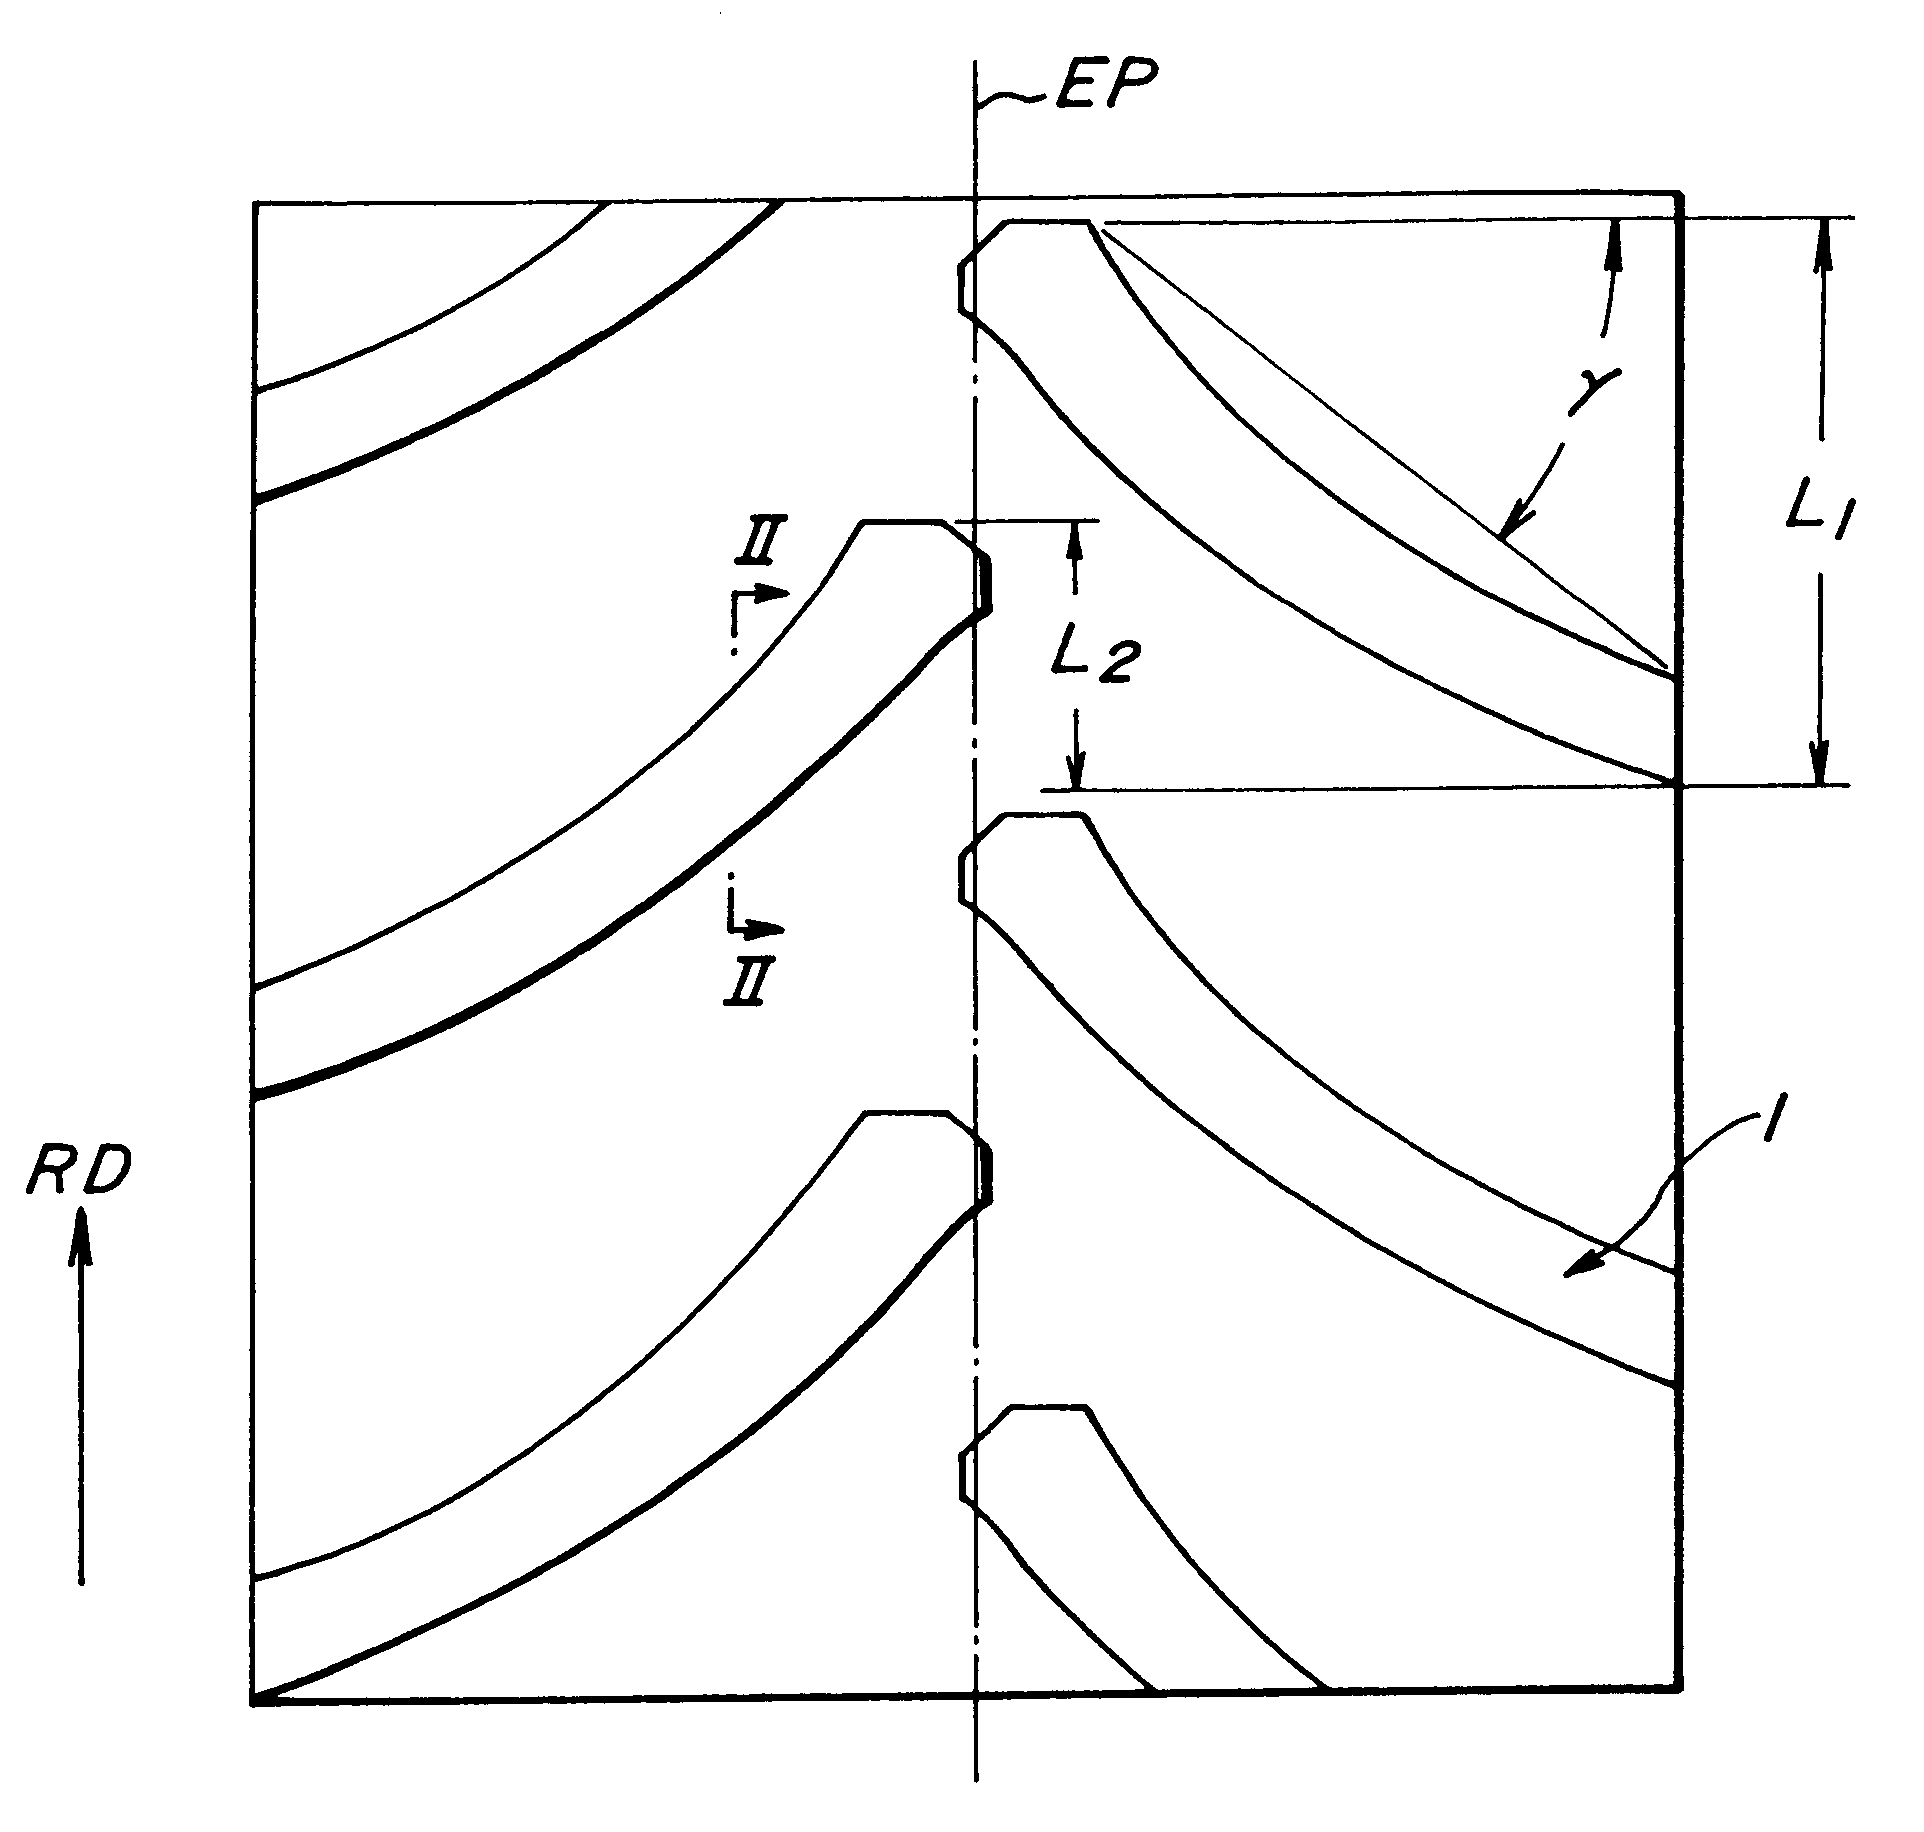 Agricultural pneumatic tires having directional lugs